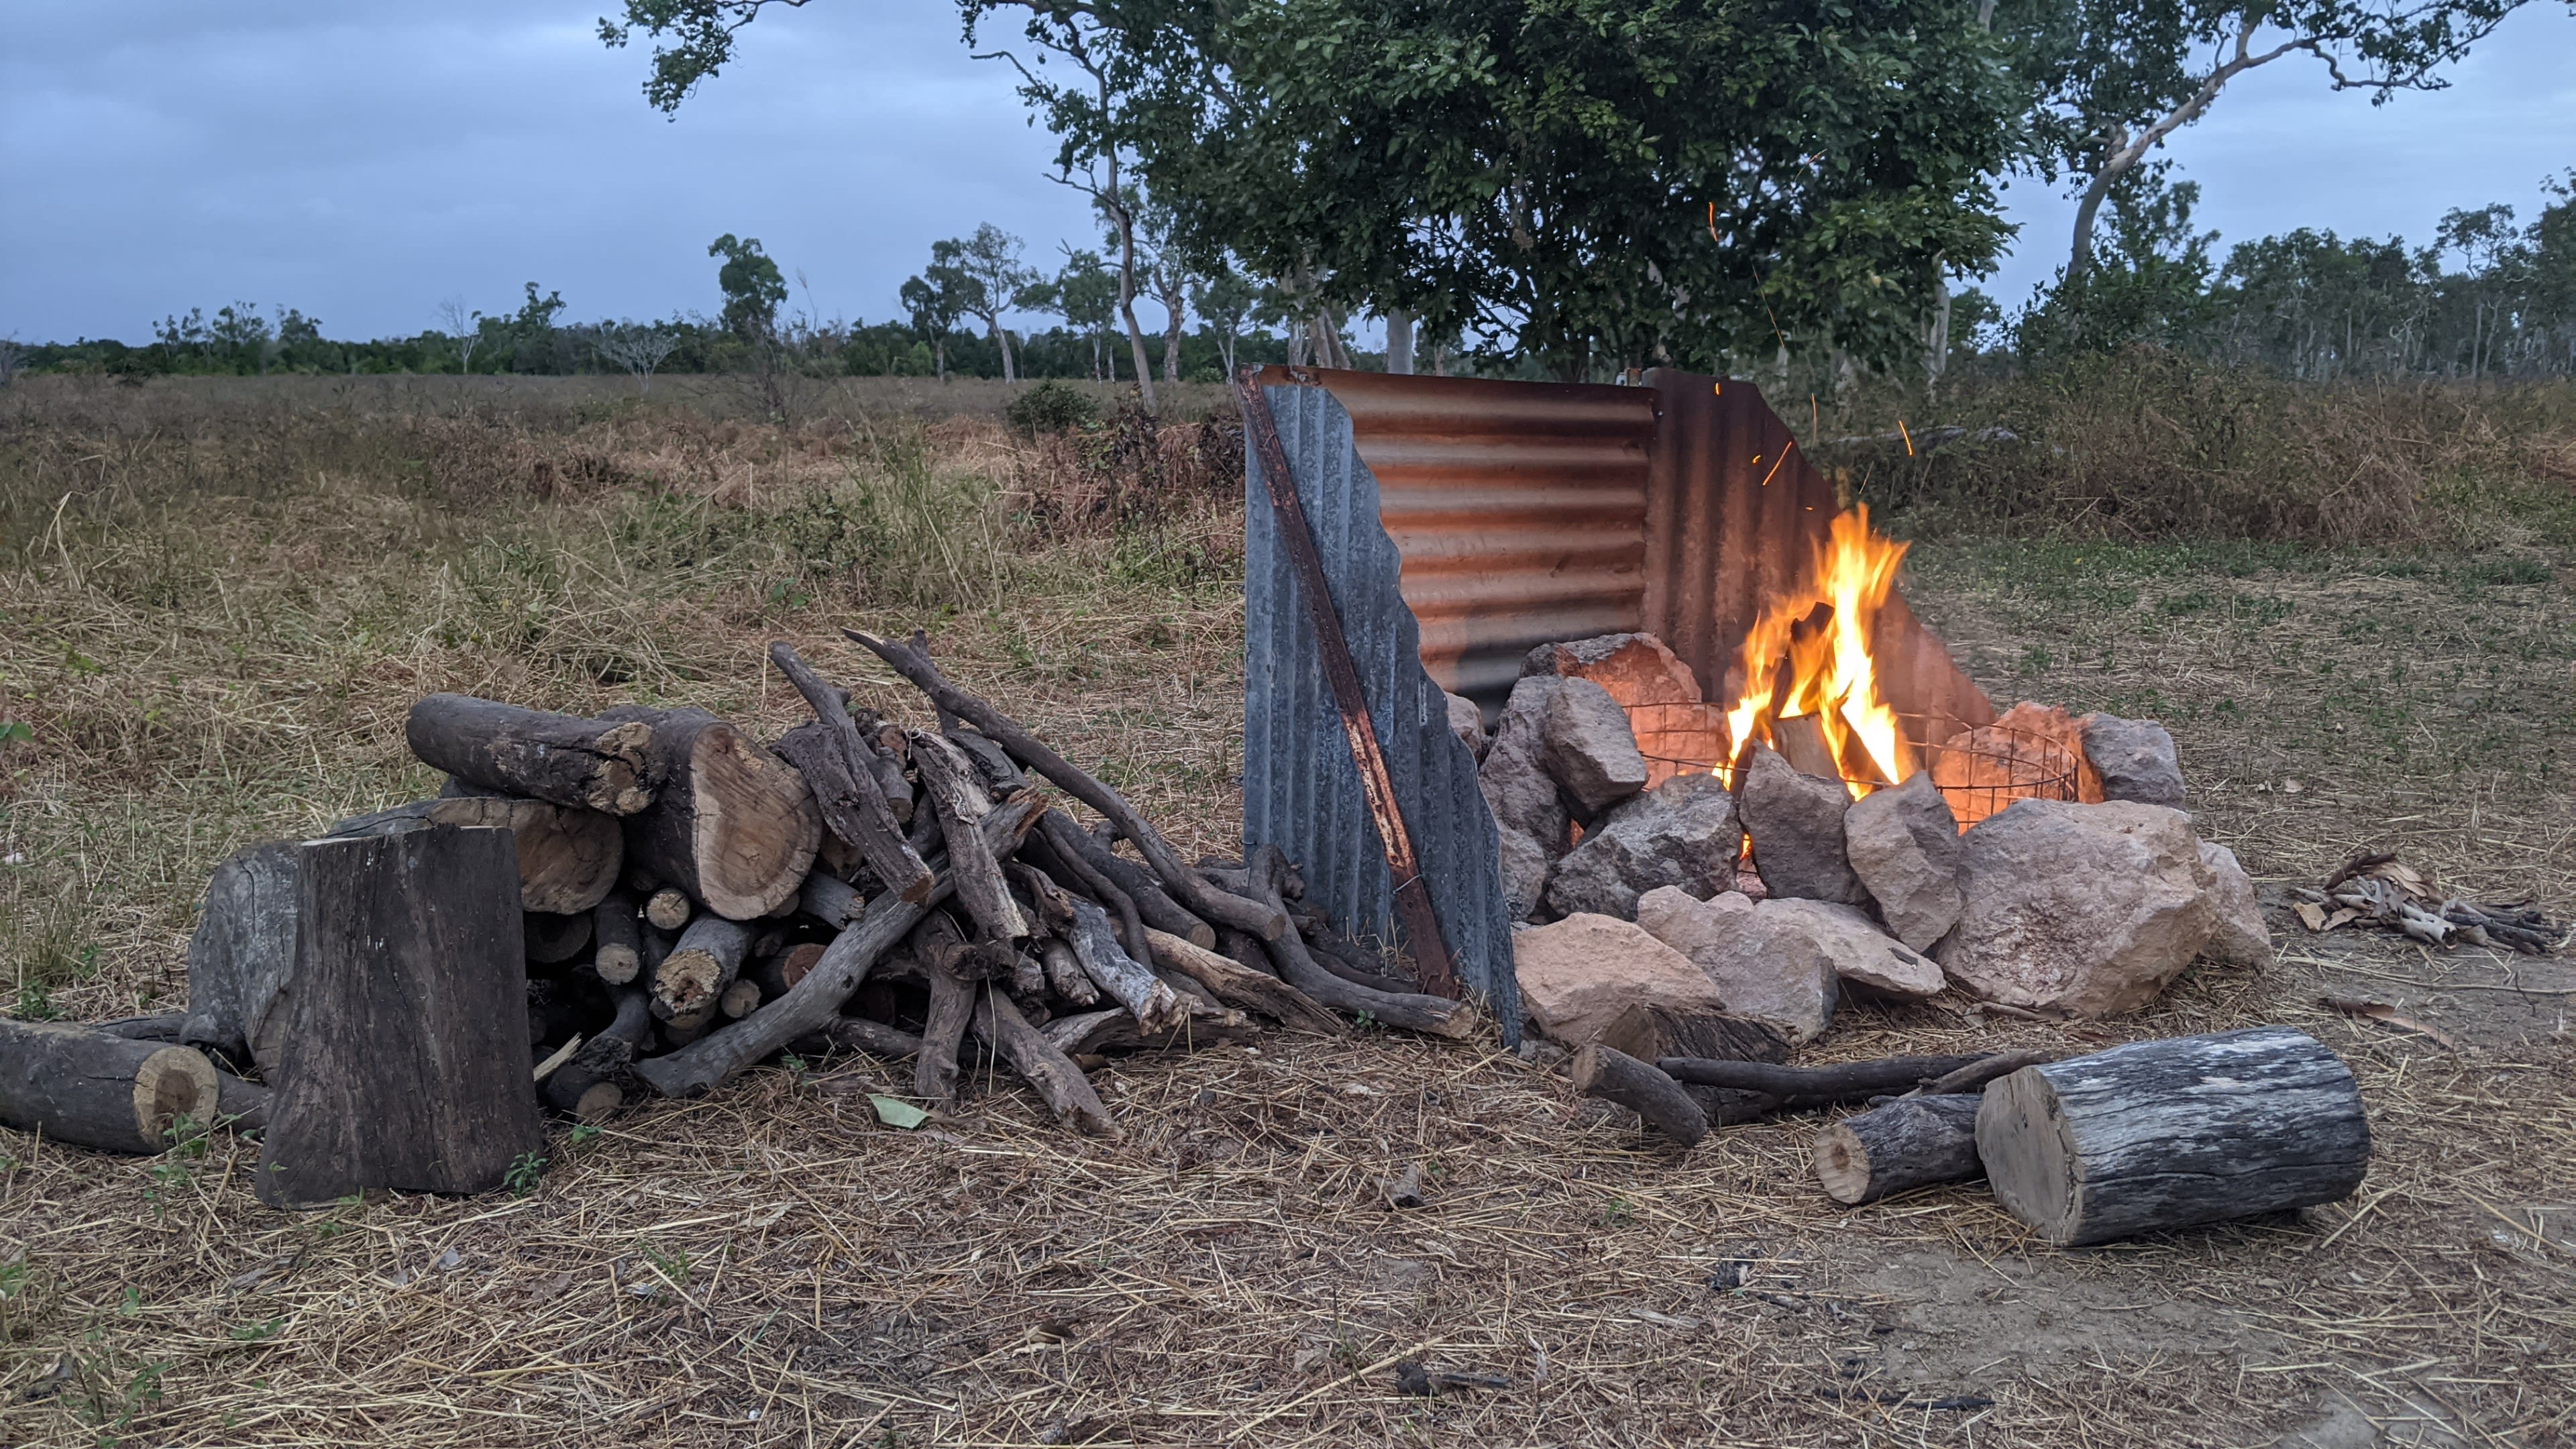 Fire pit provided and timber on payment (additional) was plenty to last us 2 nights